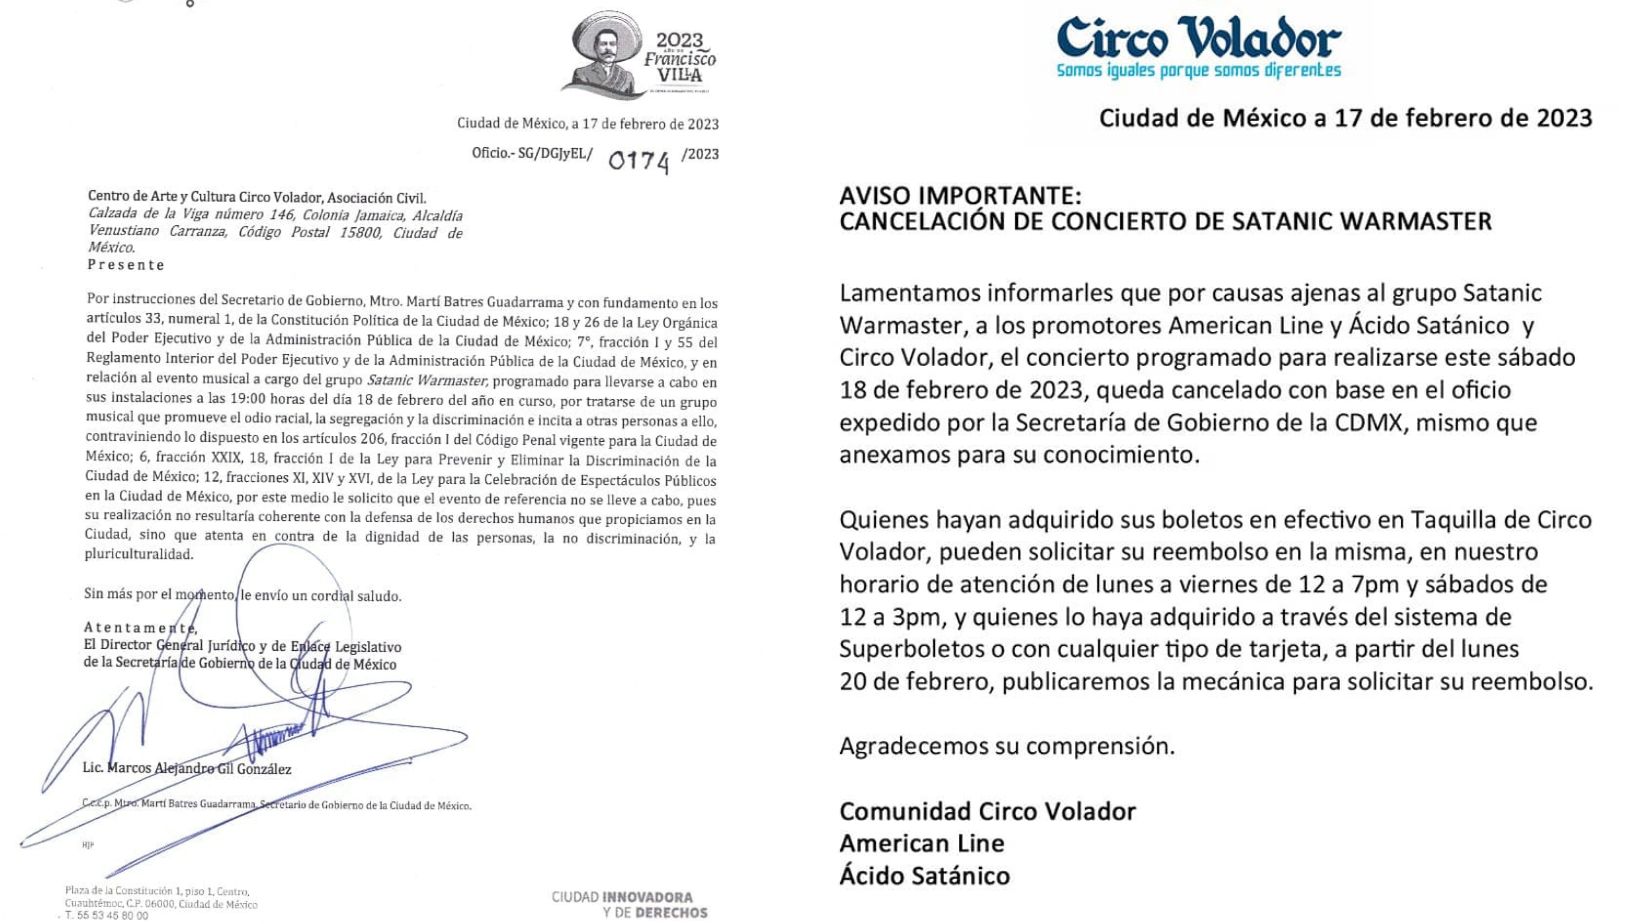 Statements issued by the Mexican authorities on the cancellation of the concert.  (Flying Circus/Government Secretary)